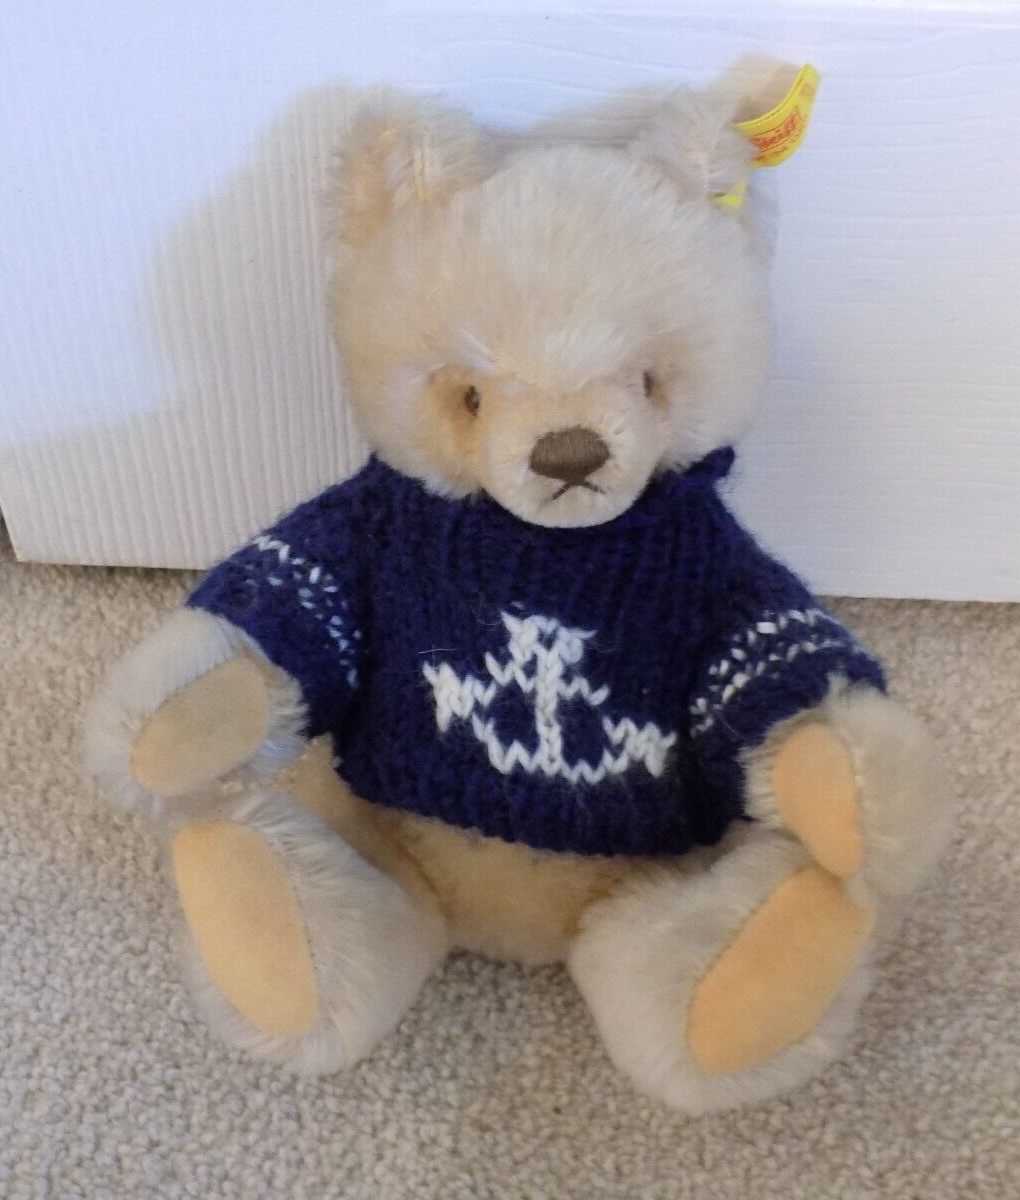 Primary image for Vintage Steiff Jointed 8" Teddy Bear 0201/26--FREE SHIPPING!